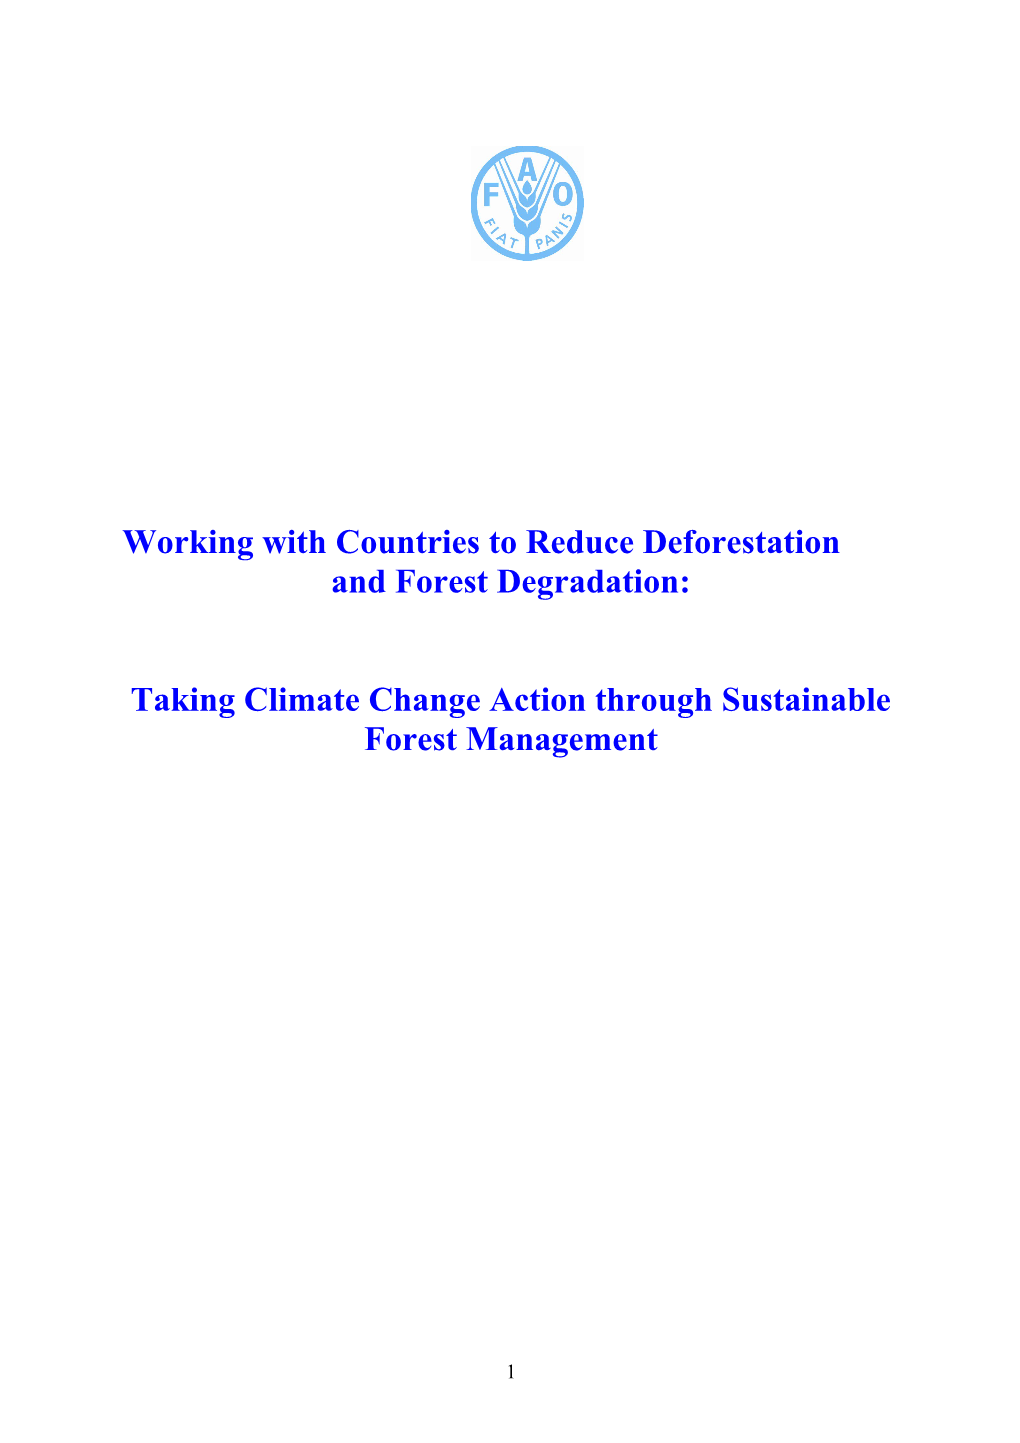 Outline for Briefing Note on FAO S Programmes in Support of Efforts to Reduce Emissions